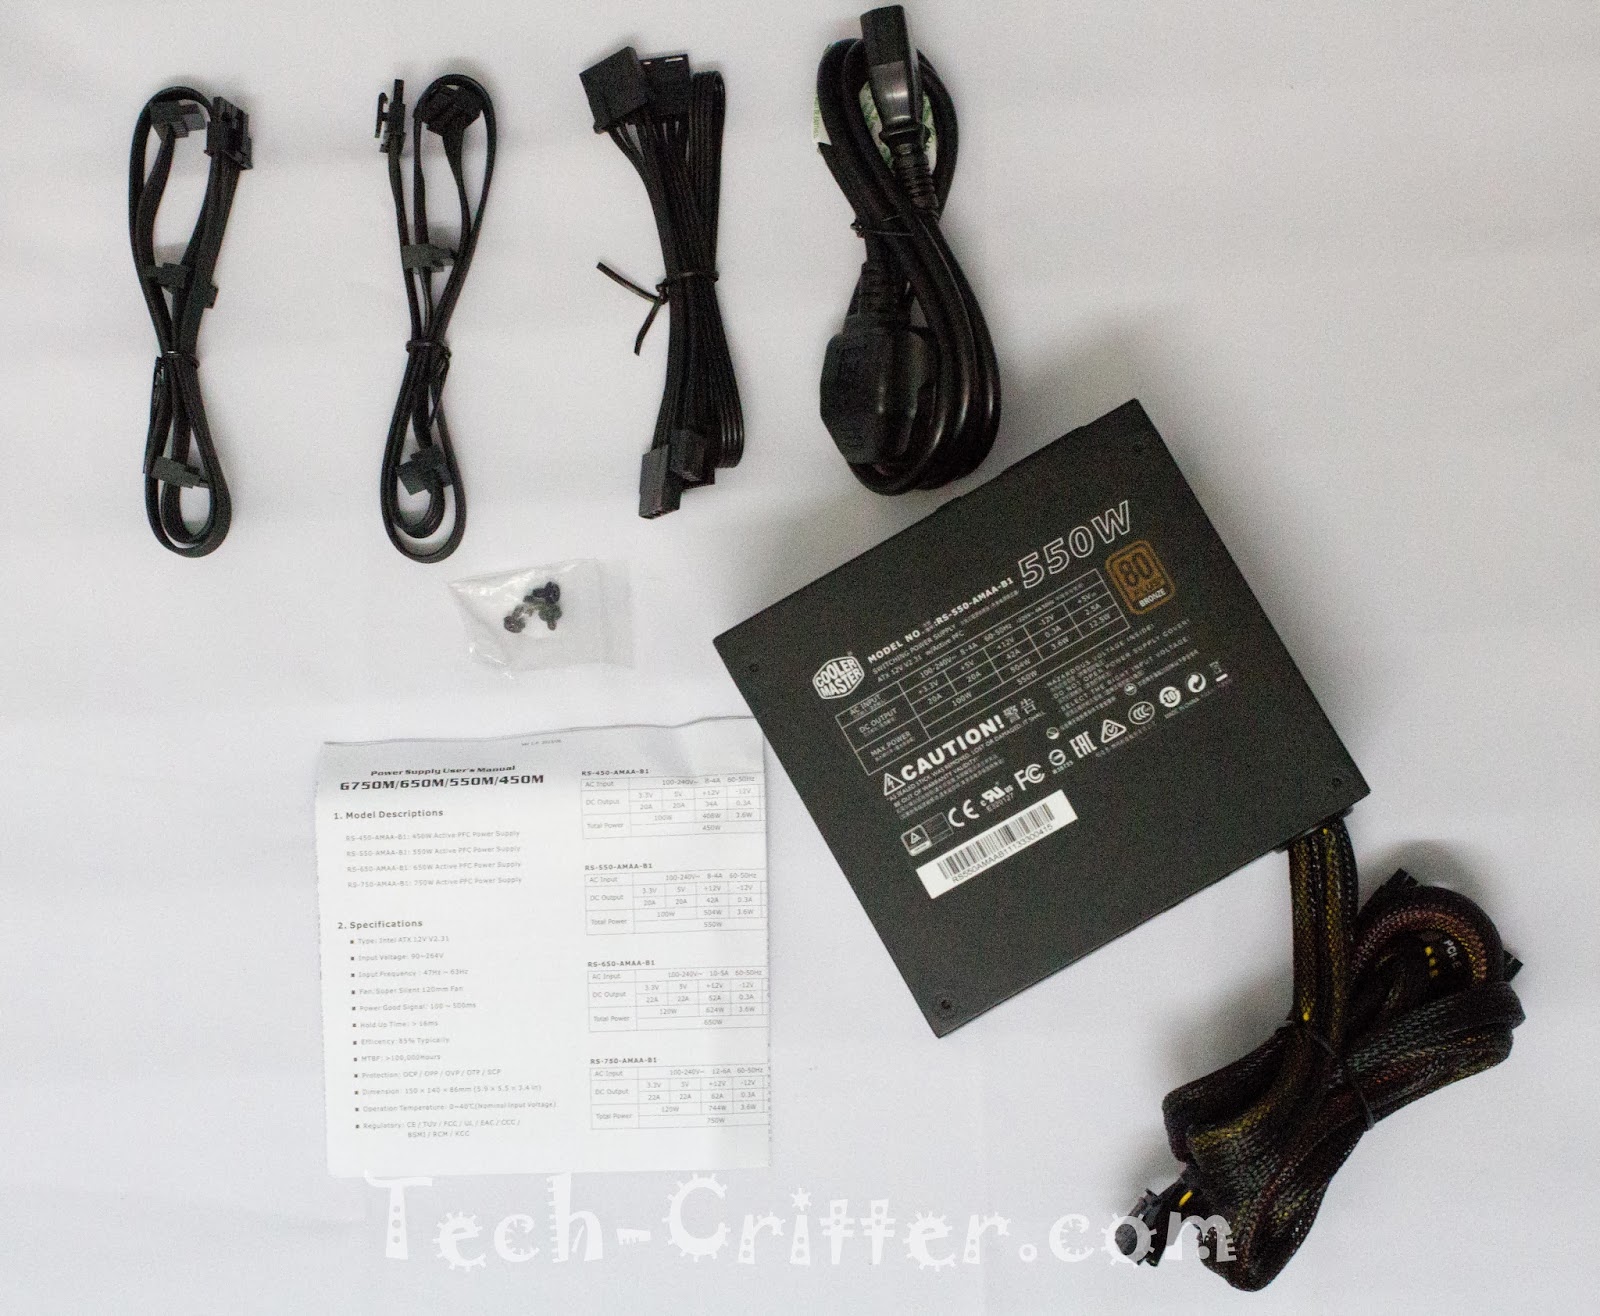 Cooler Master G550M Power Supply Unit Unboxing and Overview 12